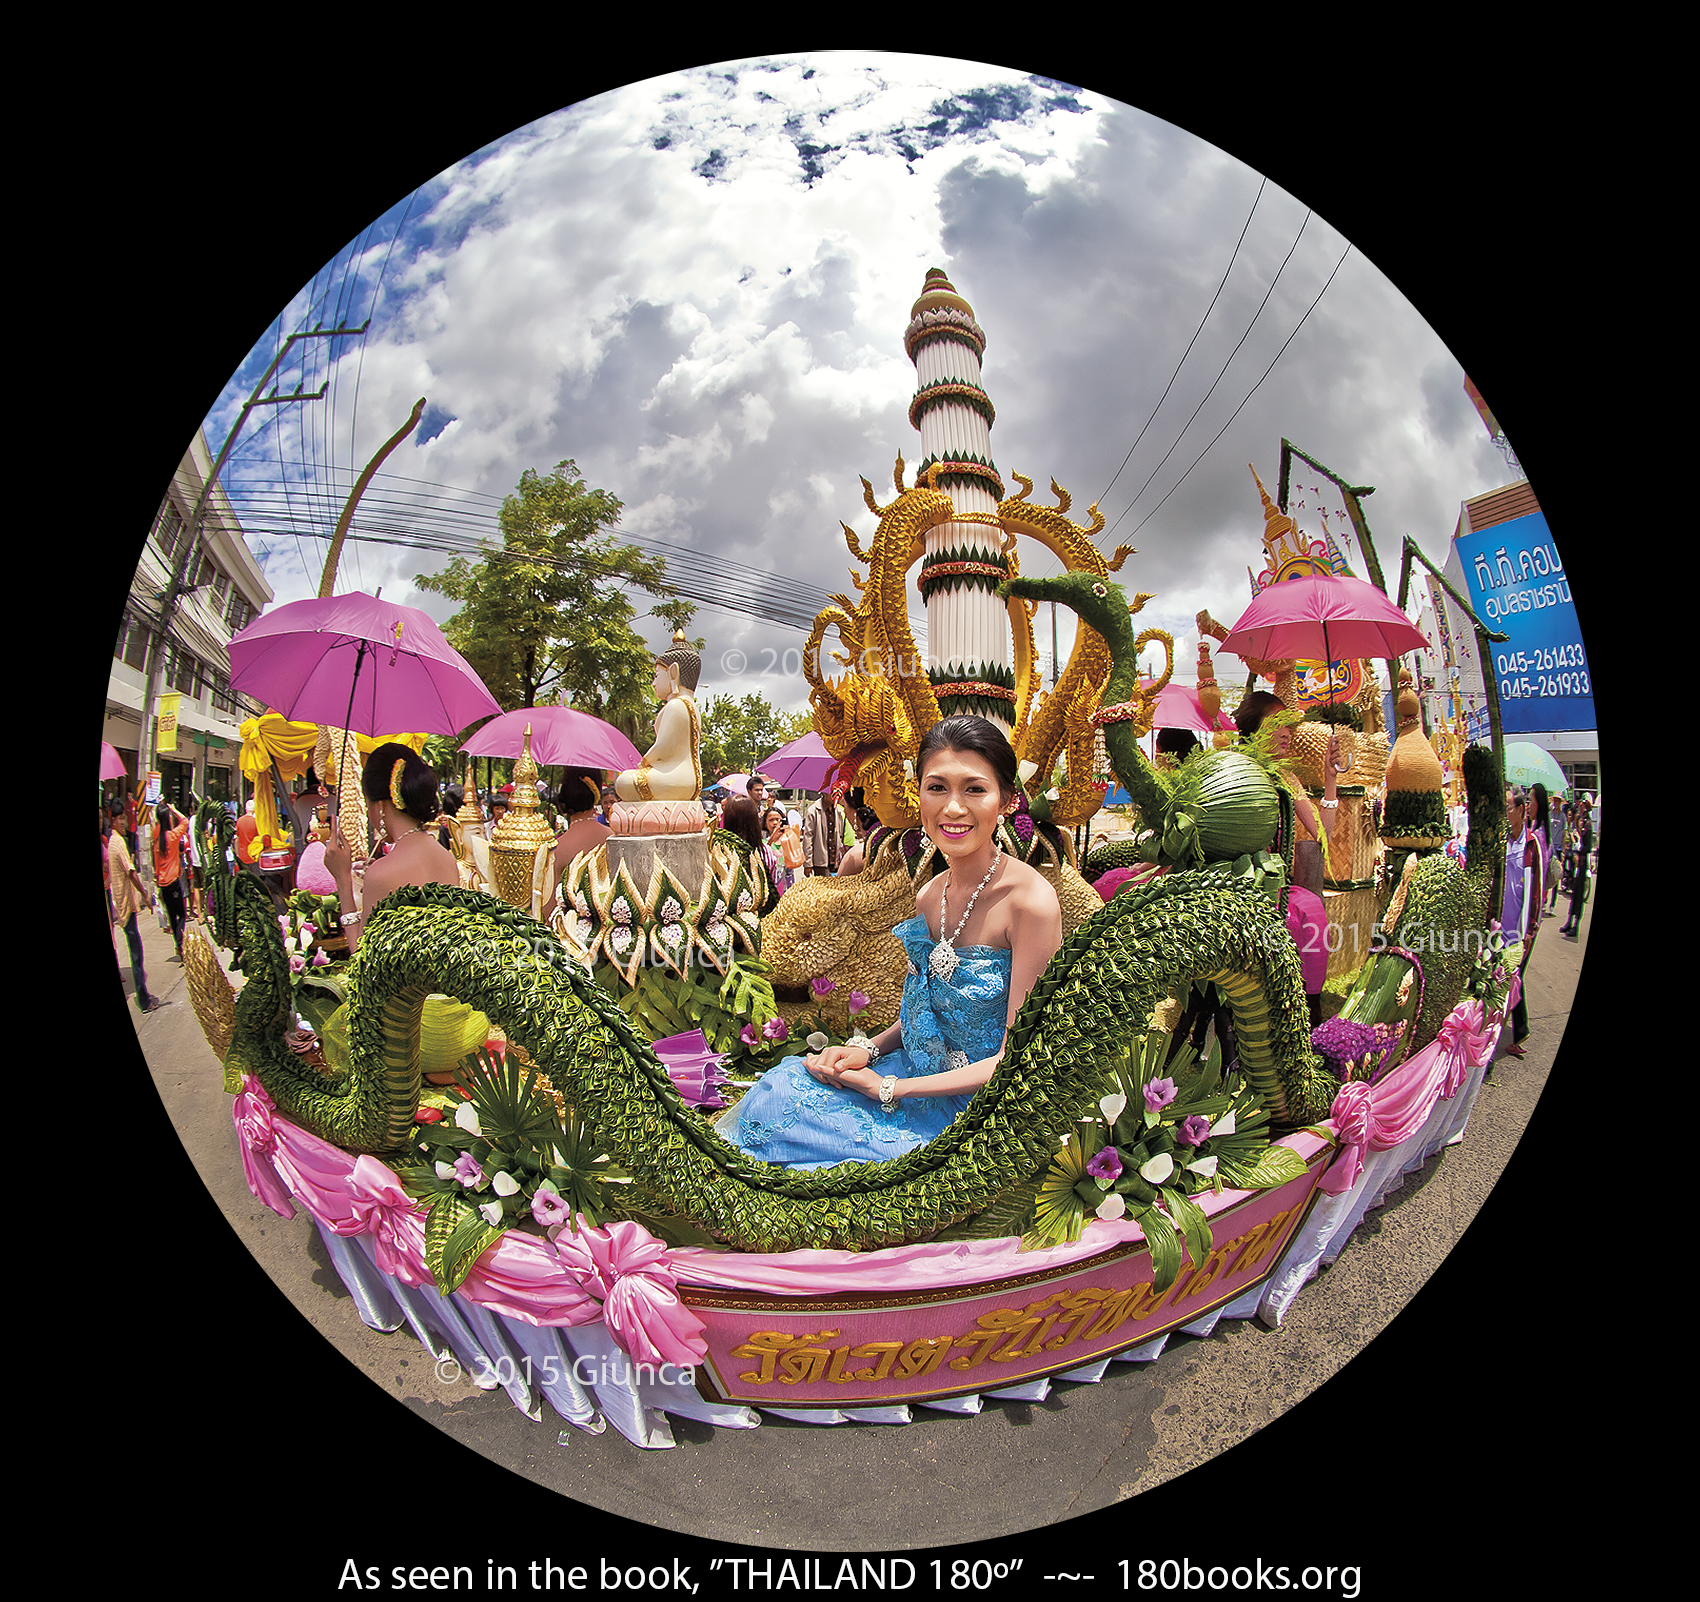 Image of A Beauty Queen Float